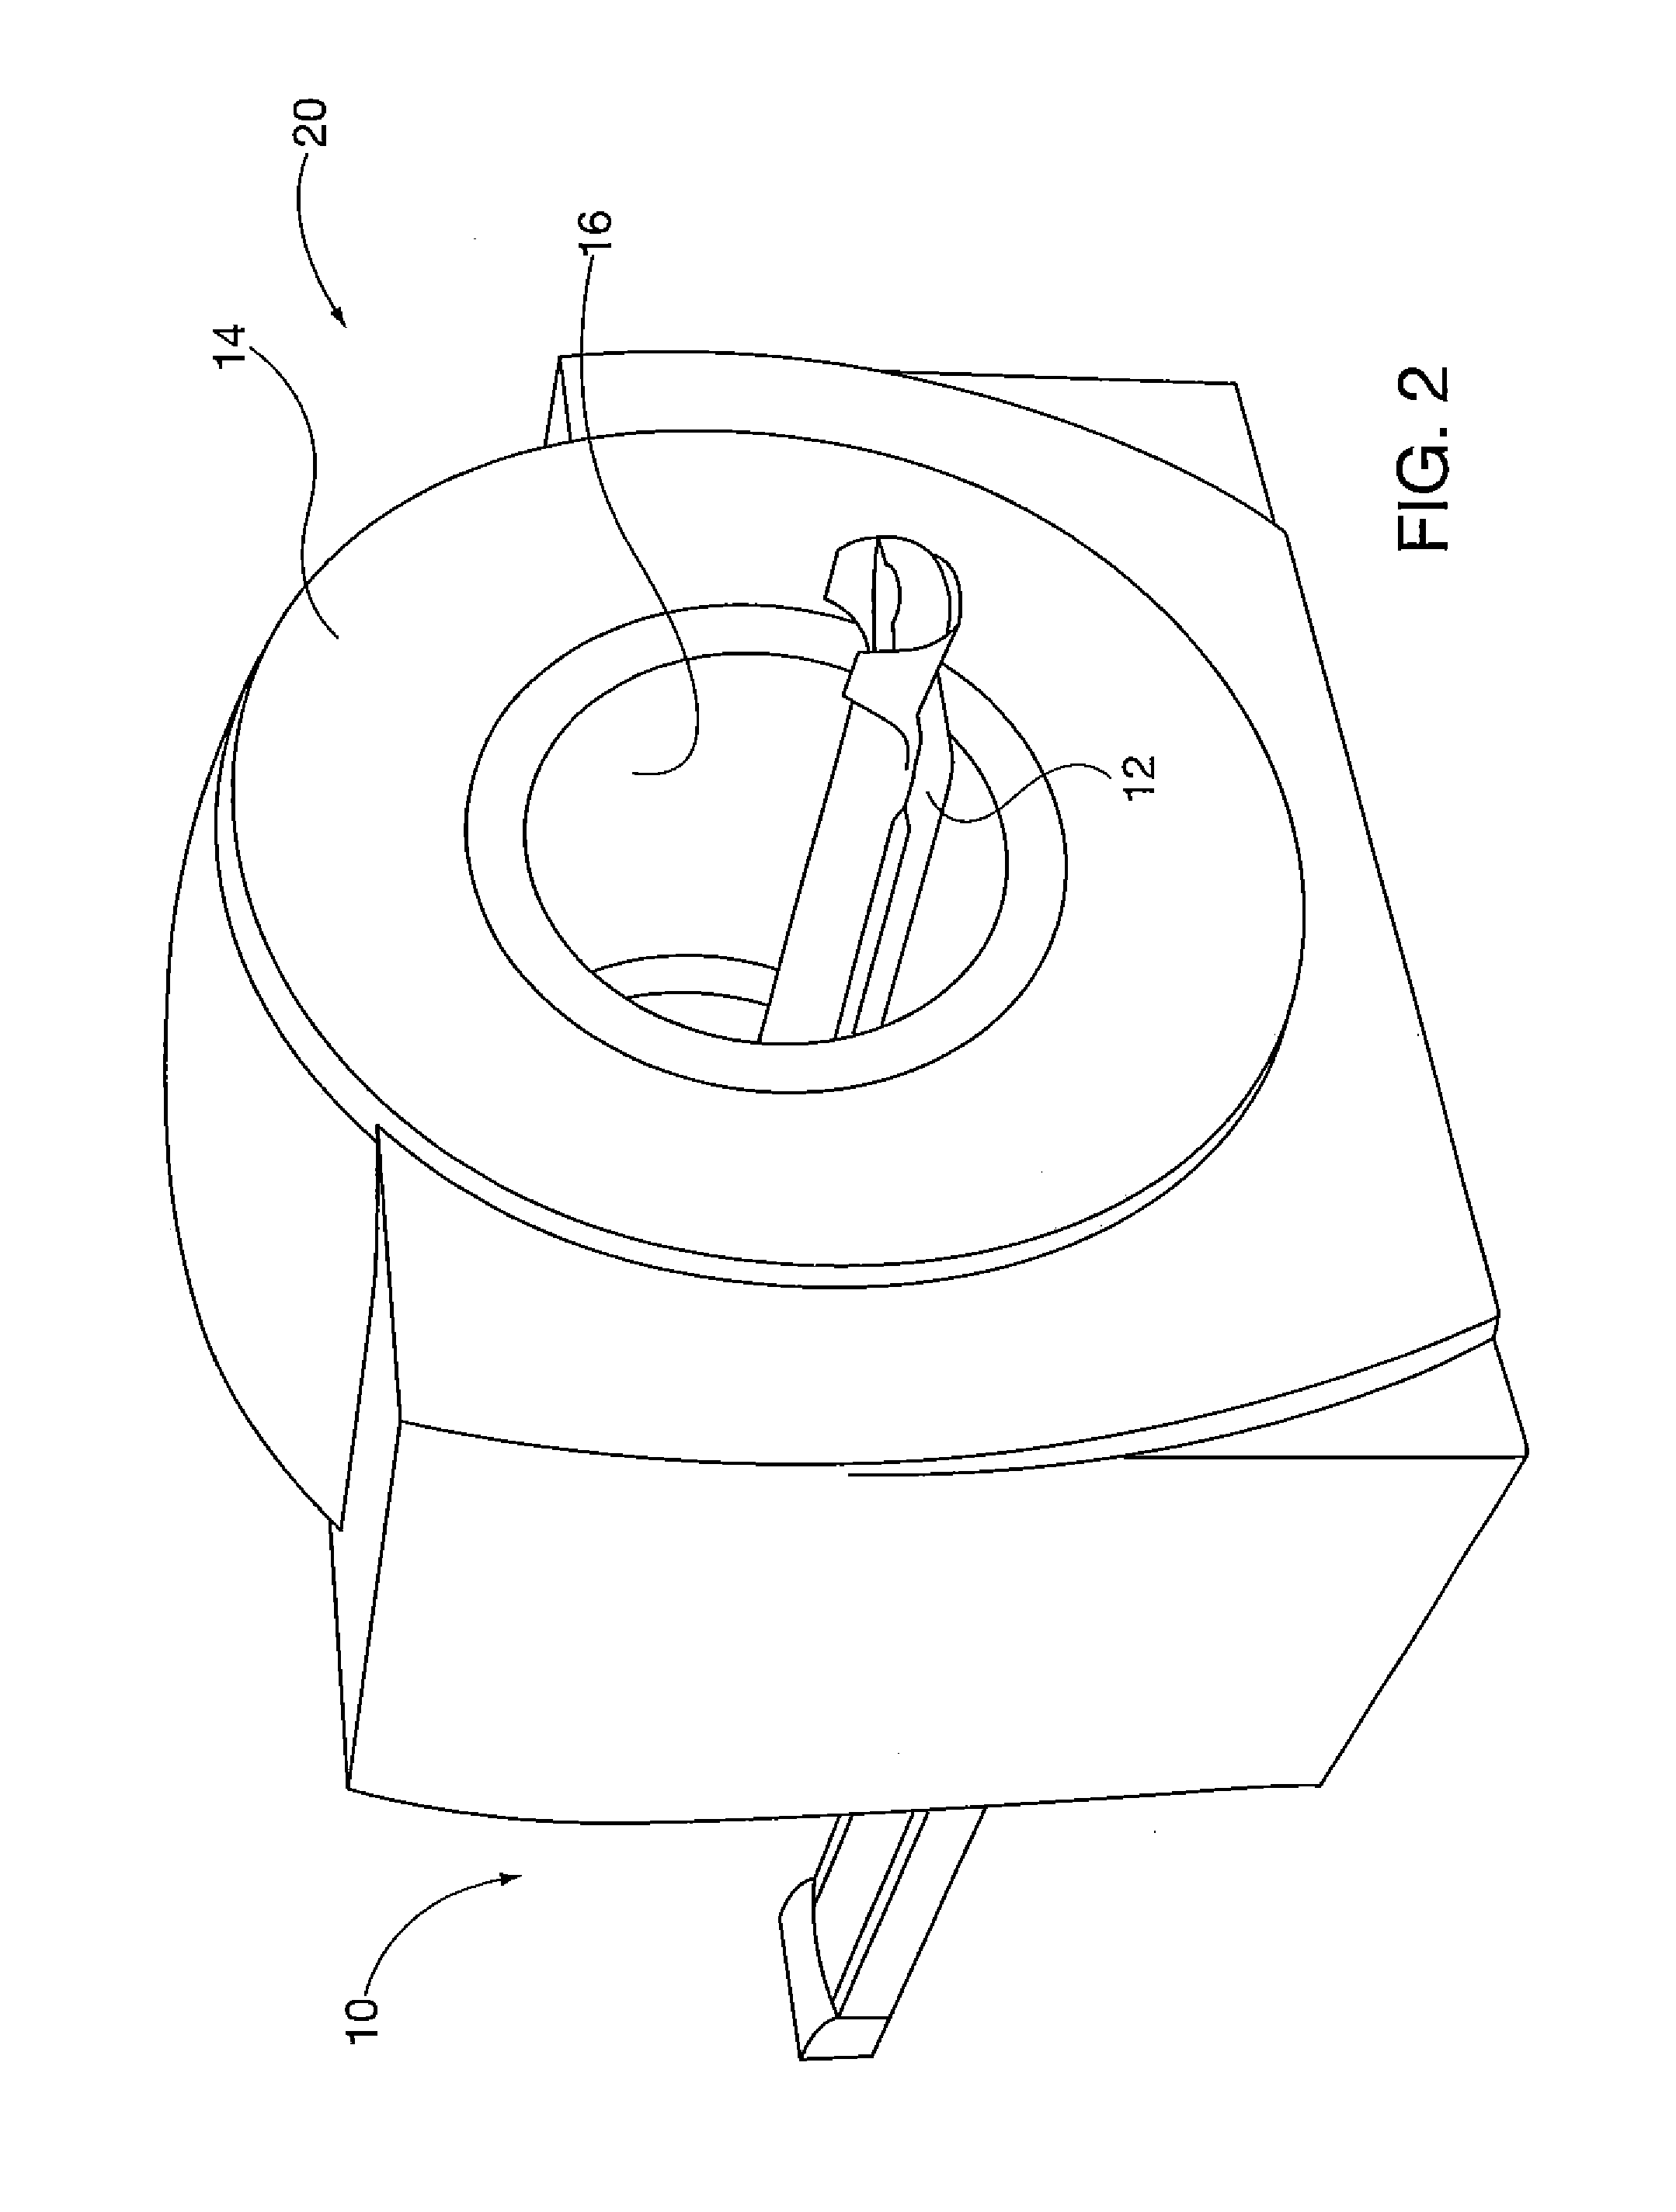 Apparatus and methods for cooling positron emission tomography scanner detector crystals